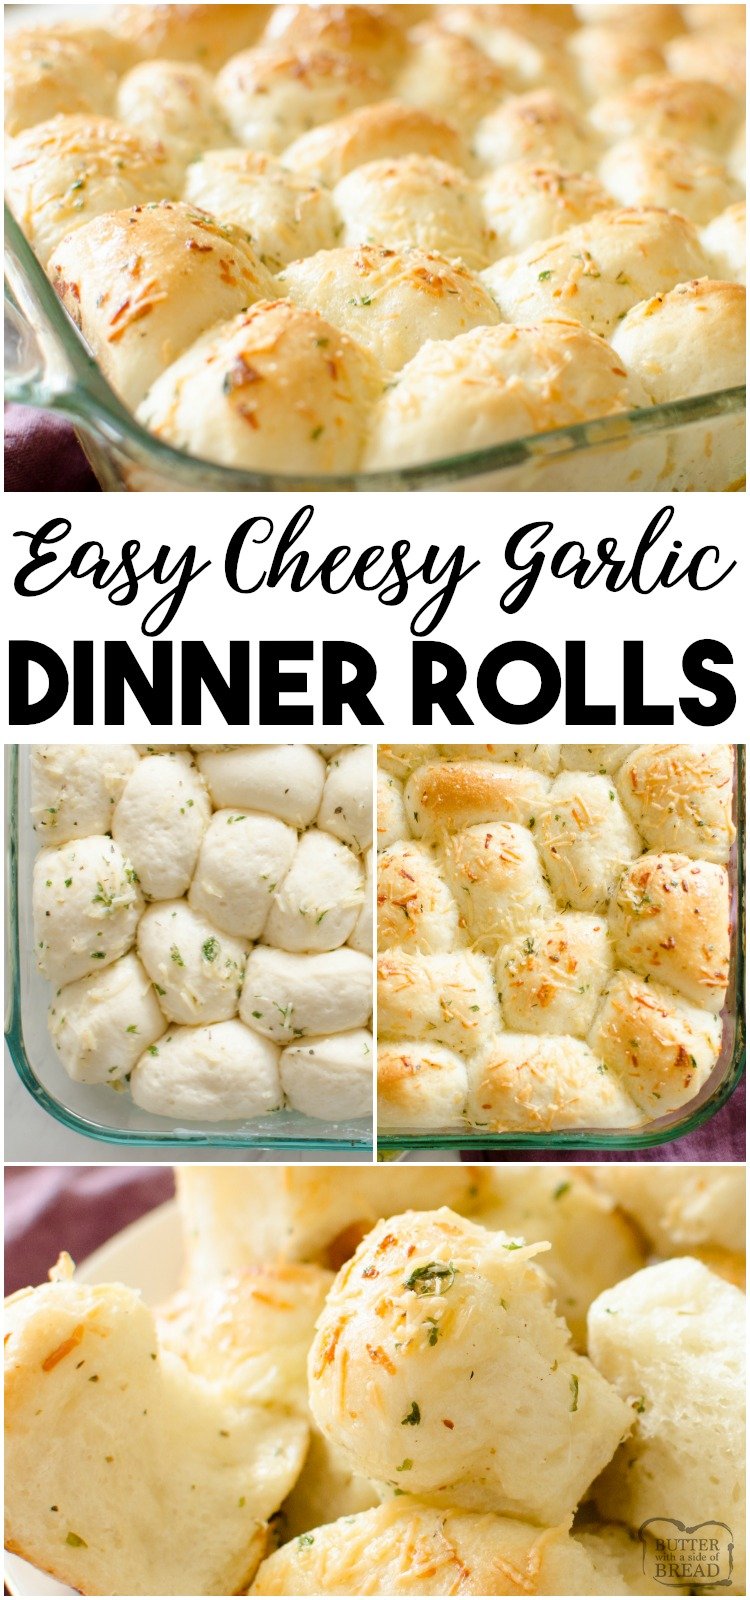 Easy Parmesan Garlic Dinner Rolls made from frozen rolls and tossed with butter and seasonings. Bakes in under 30 minutes, everyone loves these soft, buttery dinner rolls! #bread #dinner #rolls #butter #cheese #baking #food #recipe from BUTTER WITH A SIDE OF BREAD